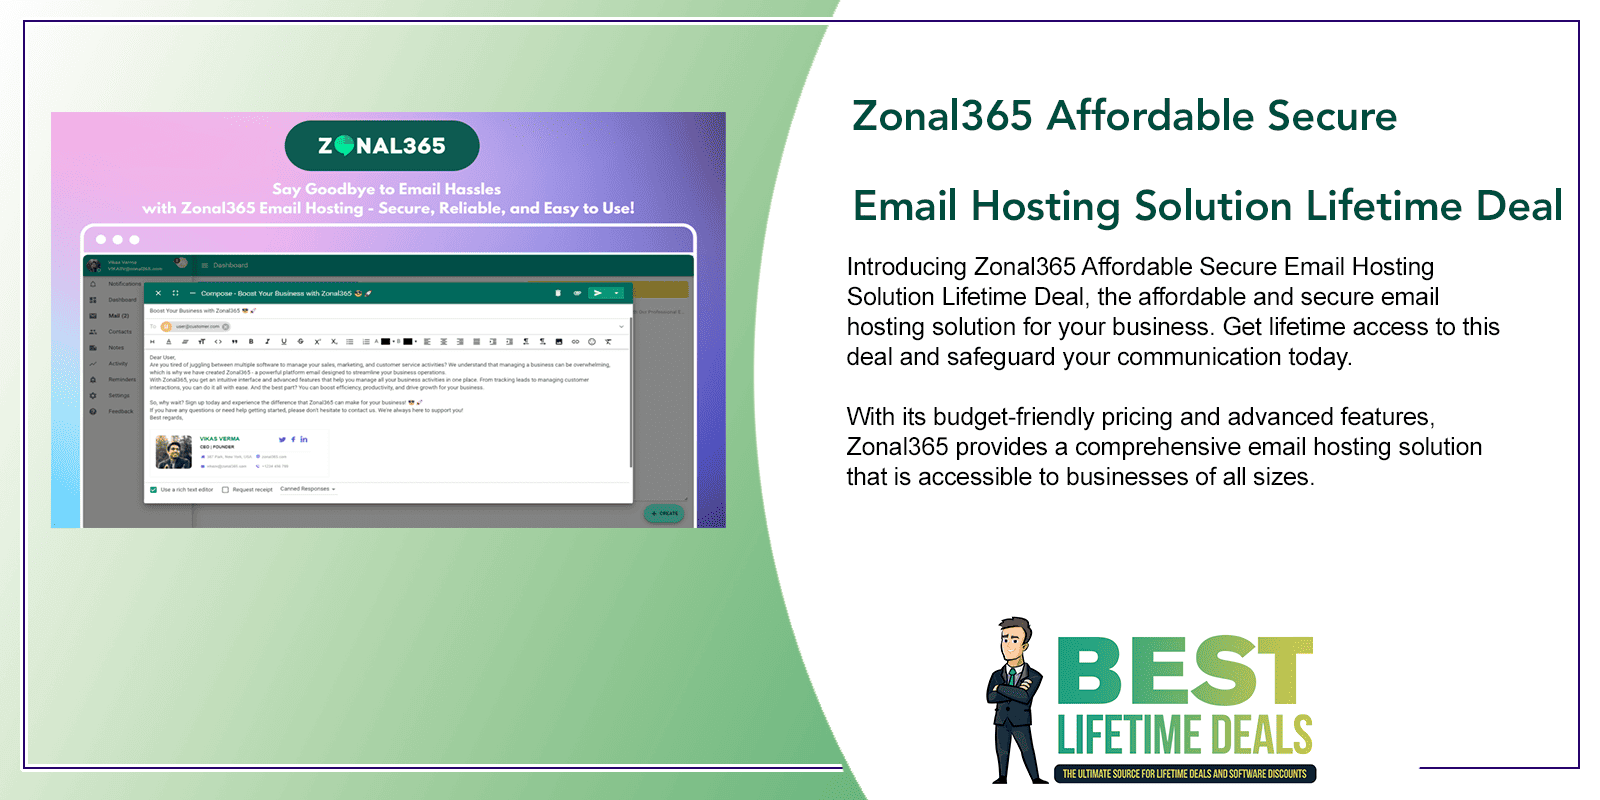 Zonal365 Affordable Secure Email Hosting Solution Lifetime Deal Featured Image